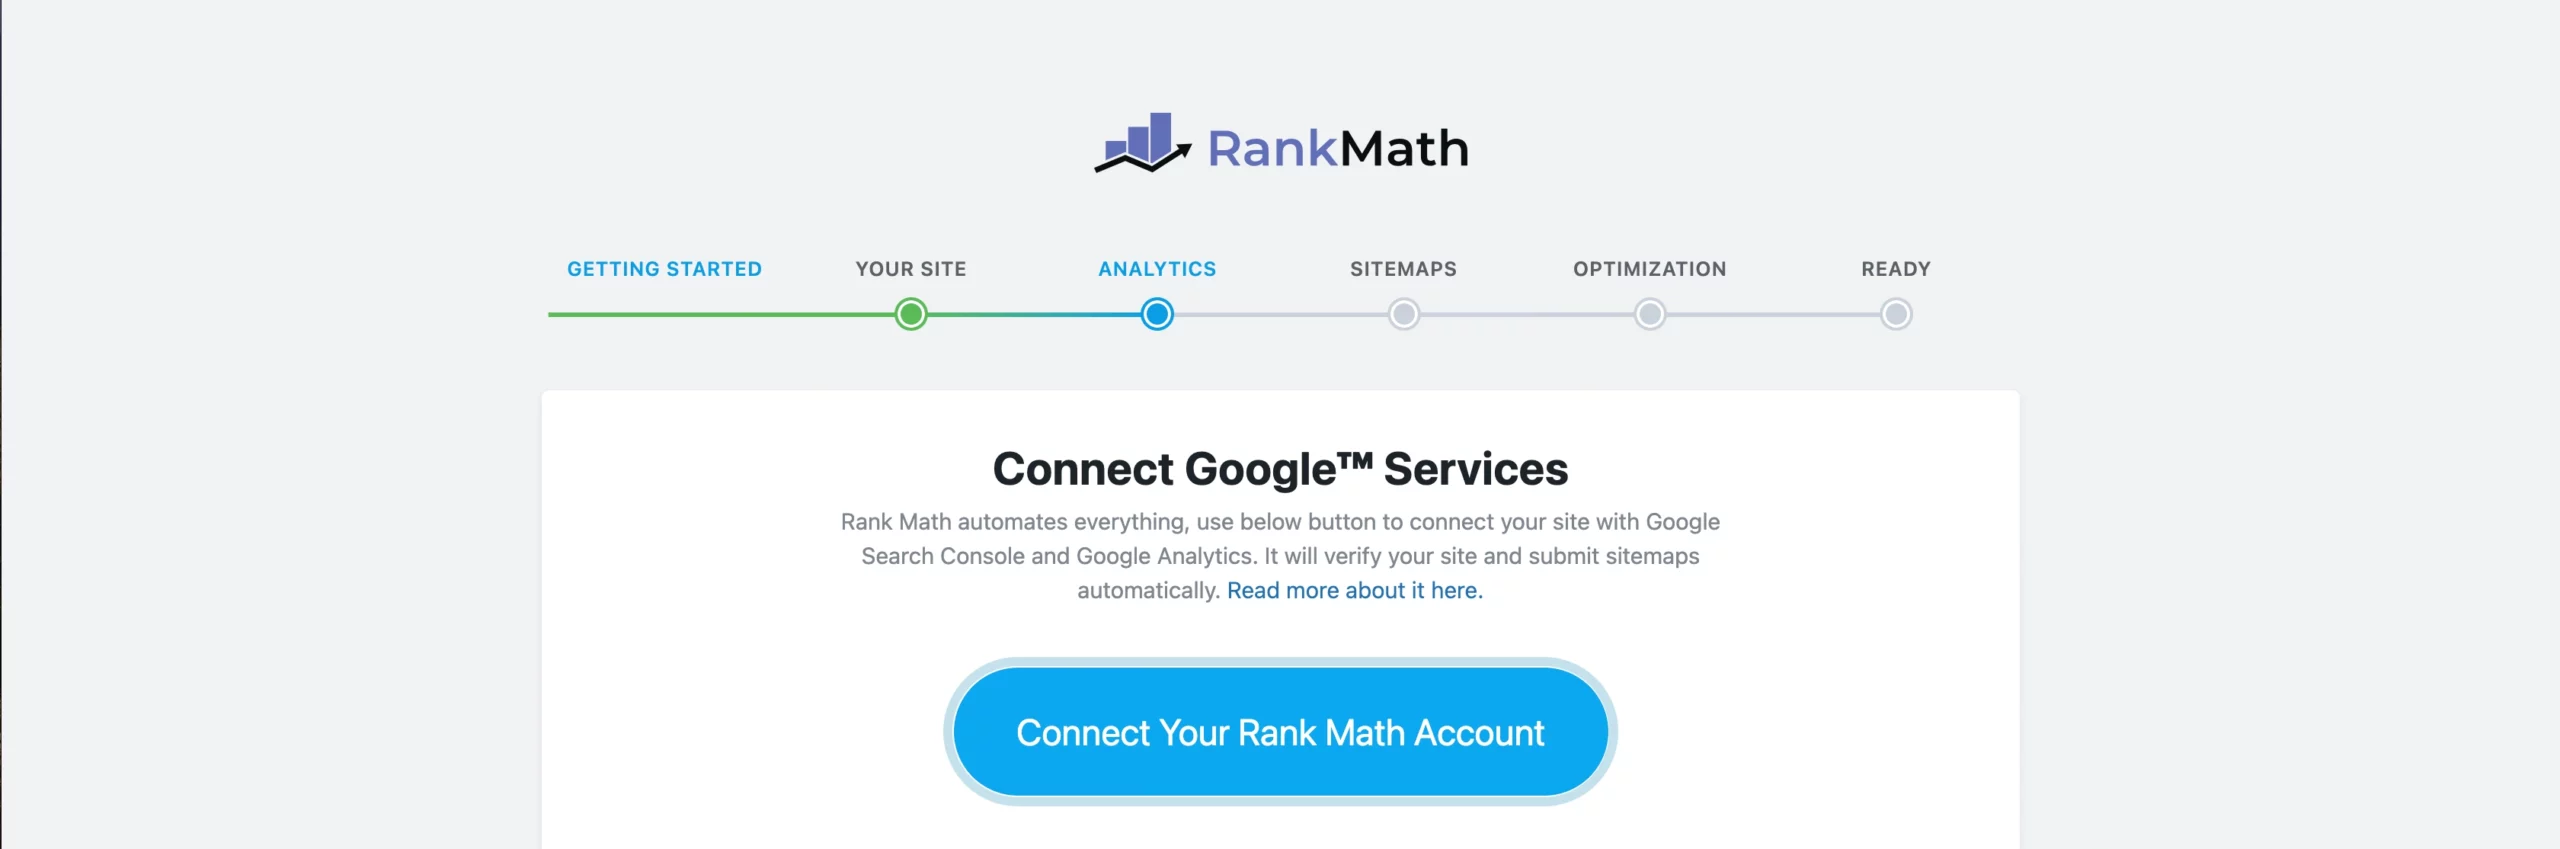 Rank Math - connect your Google account